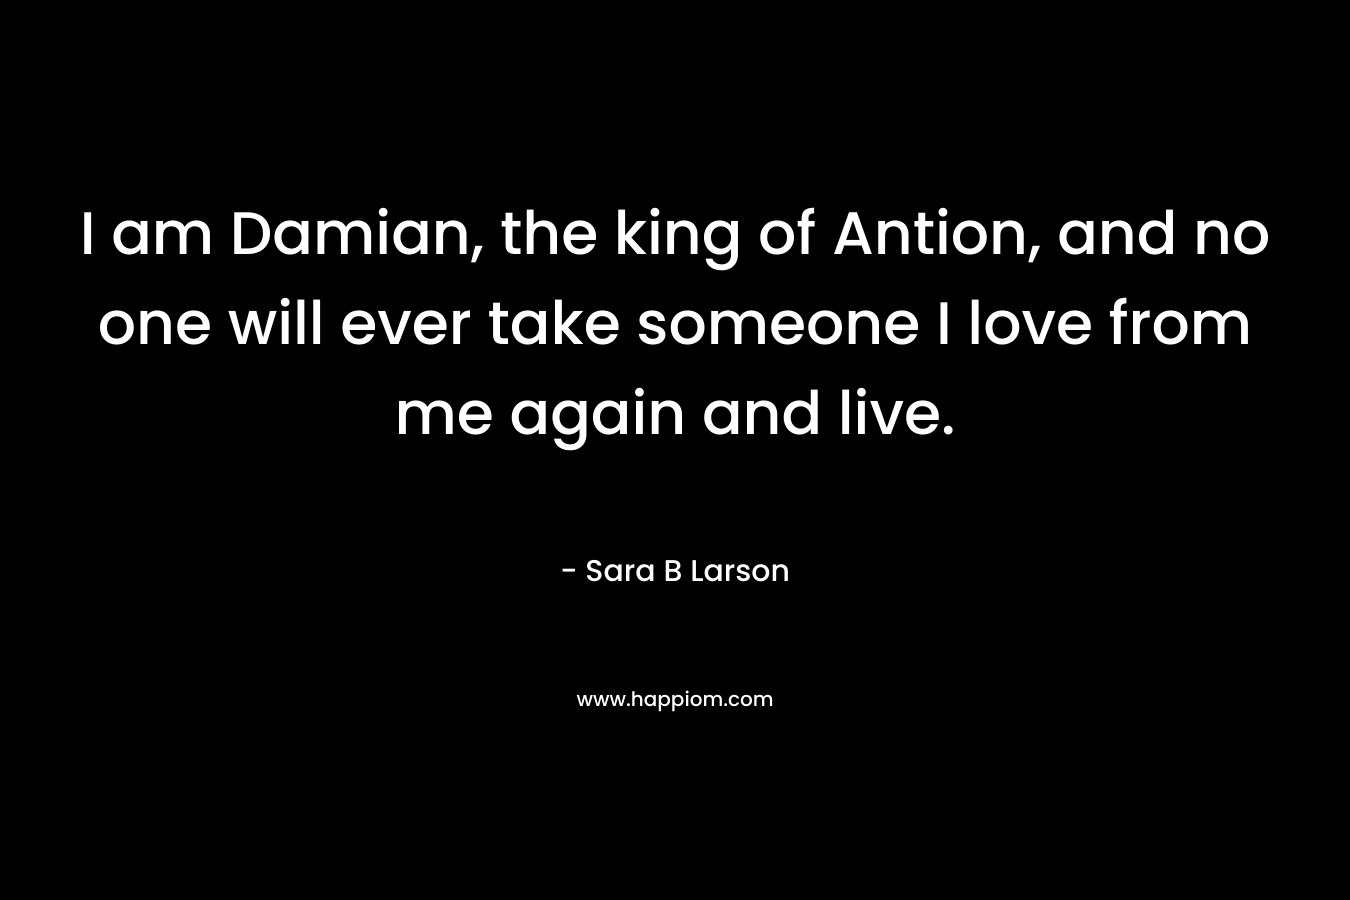 I am Damian, the king of Antion, and no one will ever take someone I love from me again and live.